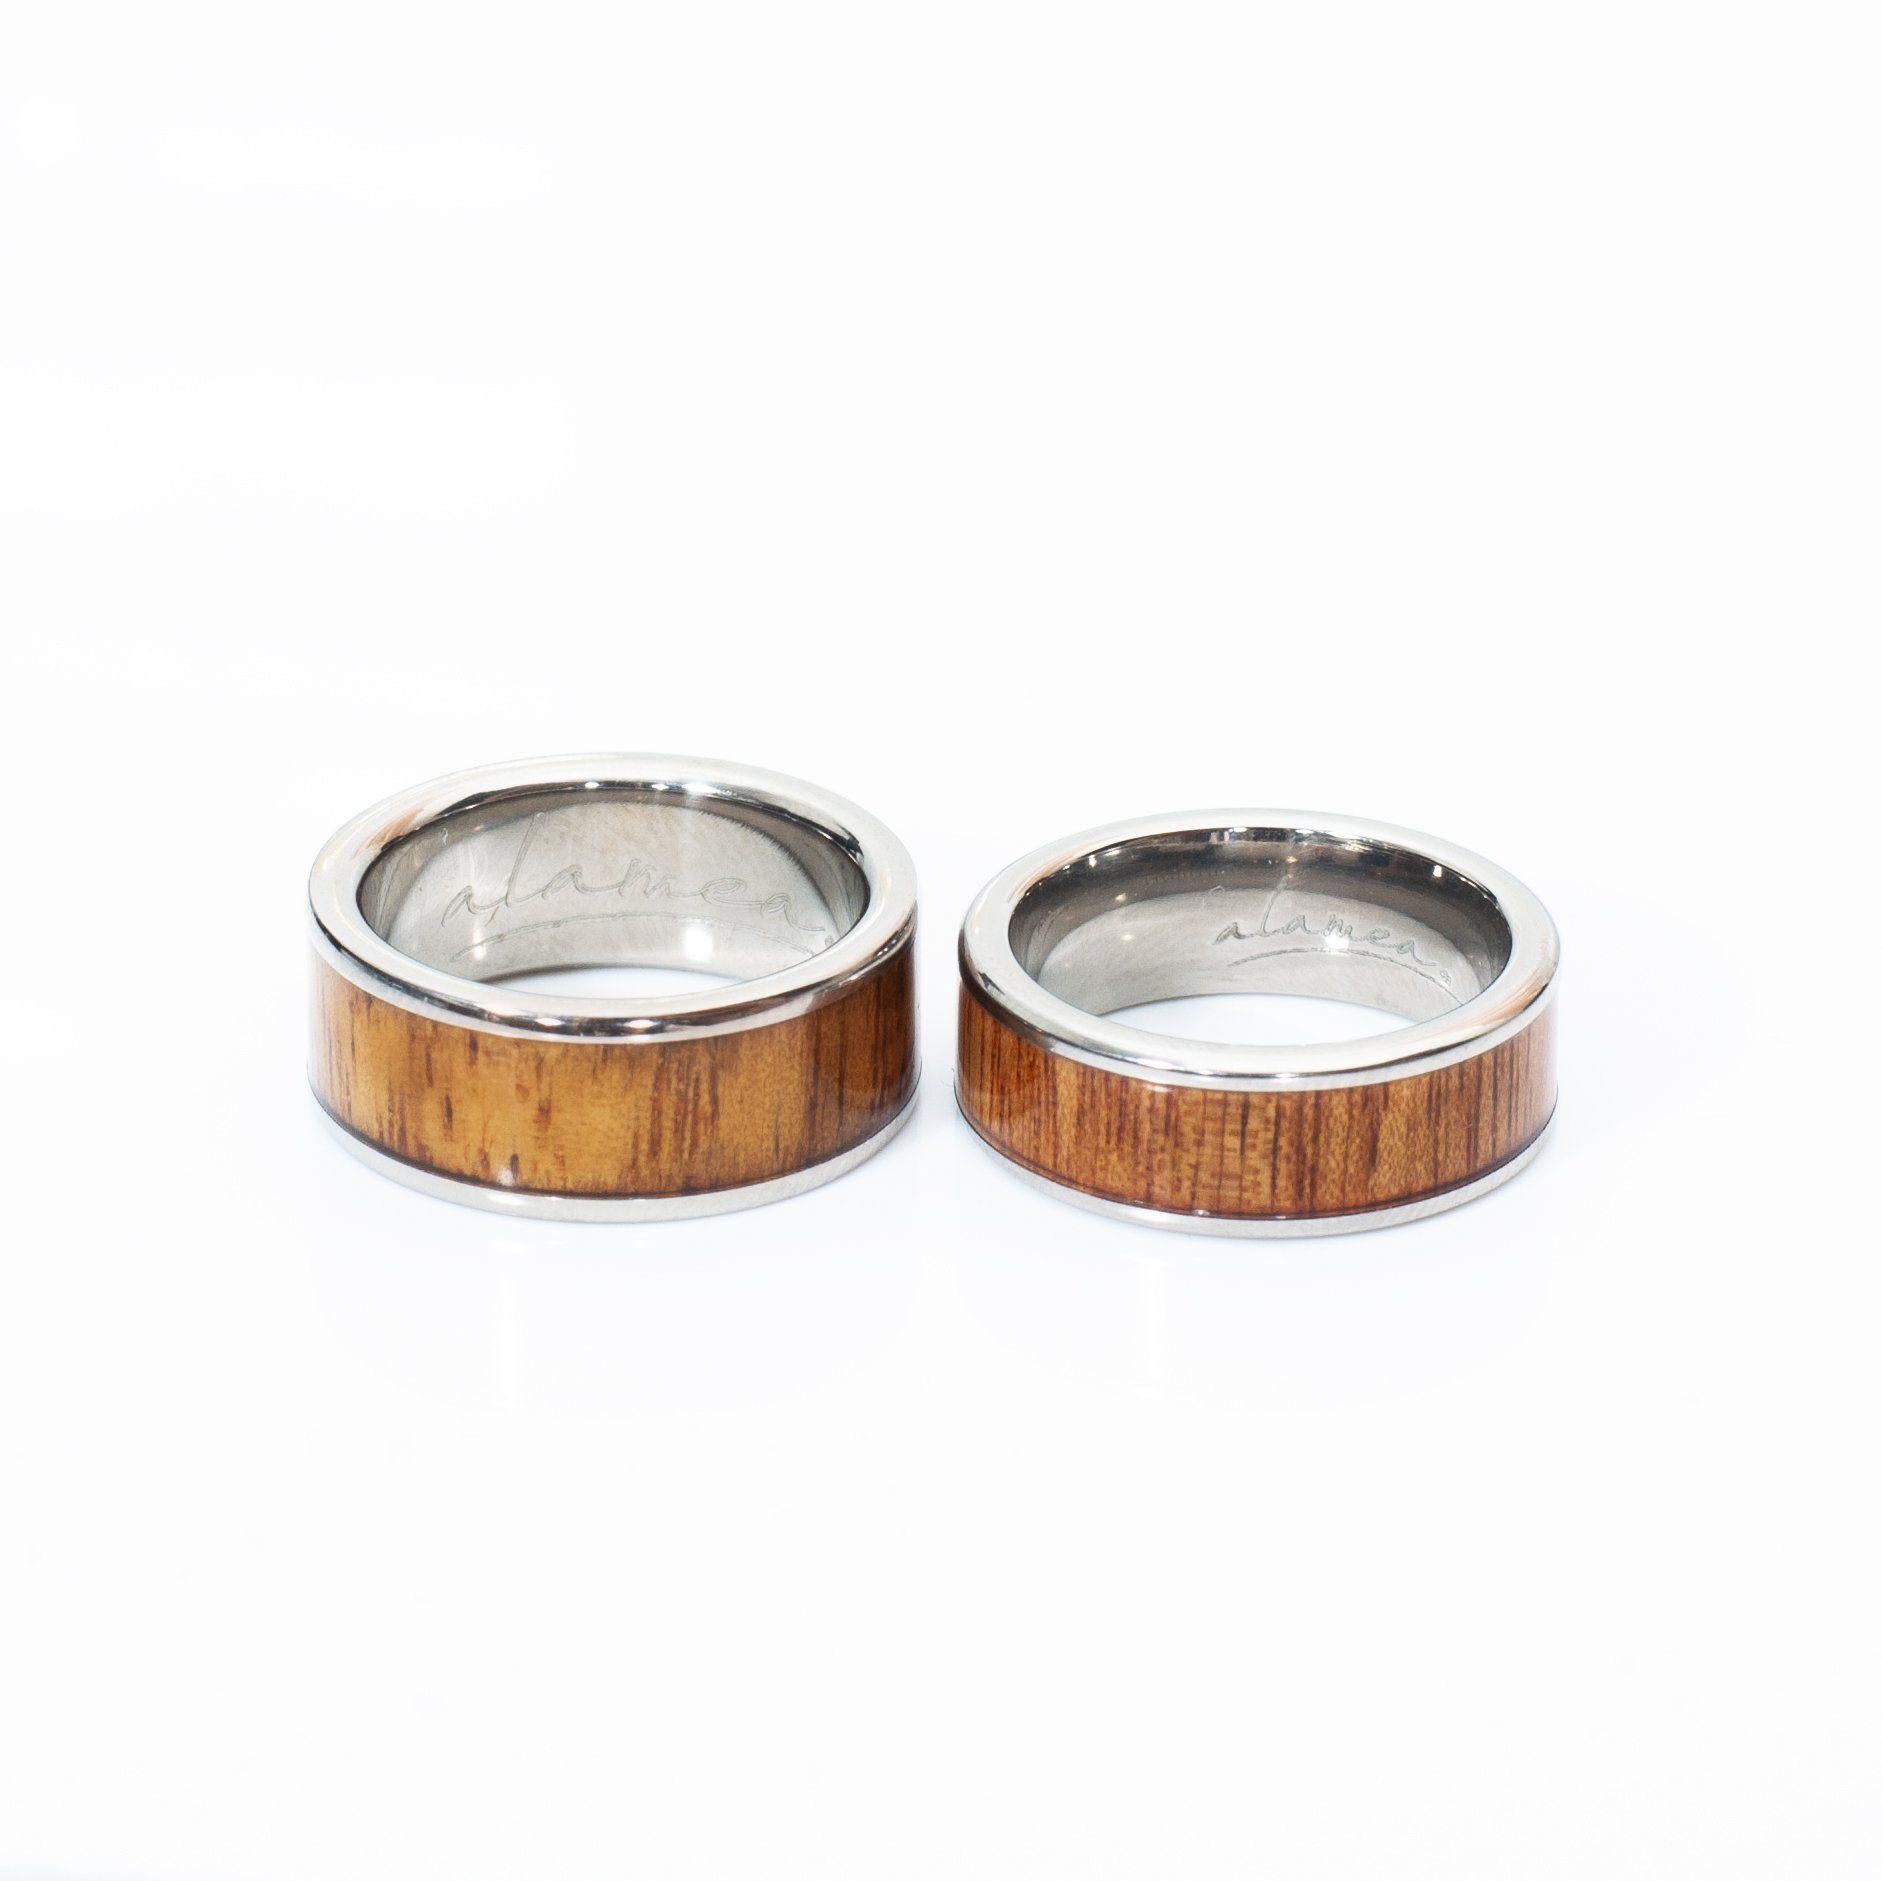 In this photo there are two rings made of koa wood and titanium placed side-by-side.